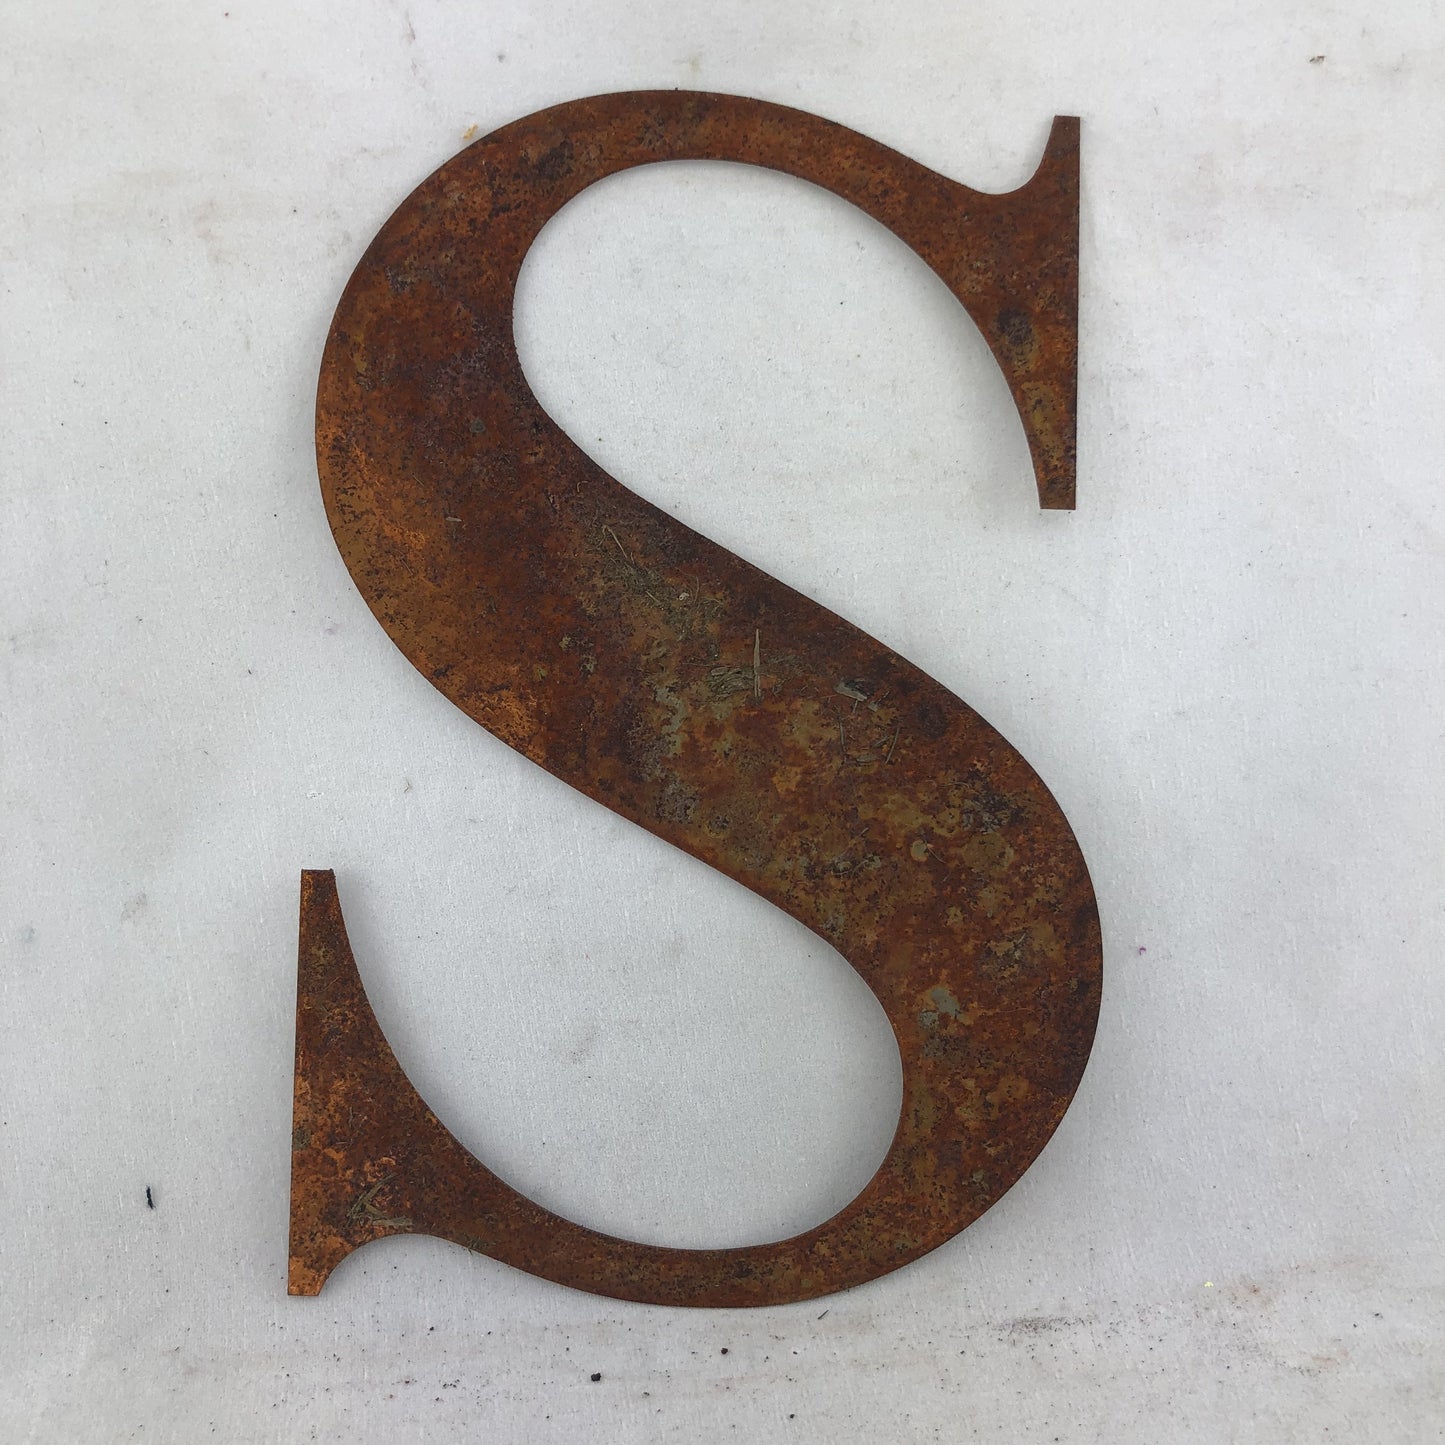 7" Metal Accent Initial  Rustic Letter Cutouts  17 Styles